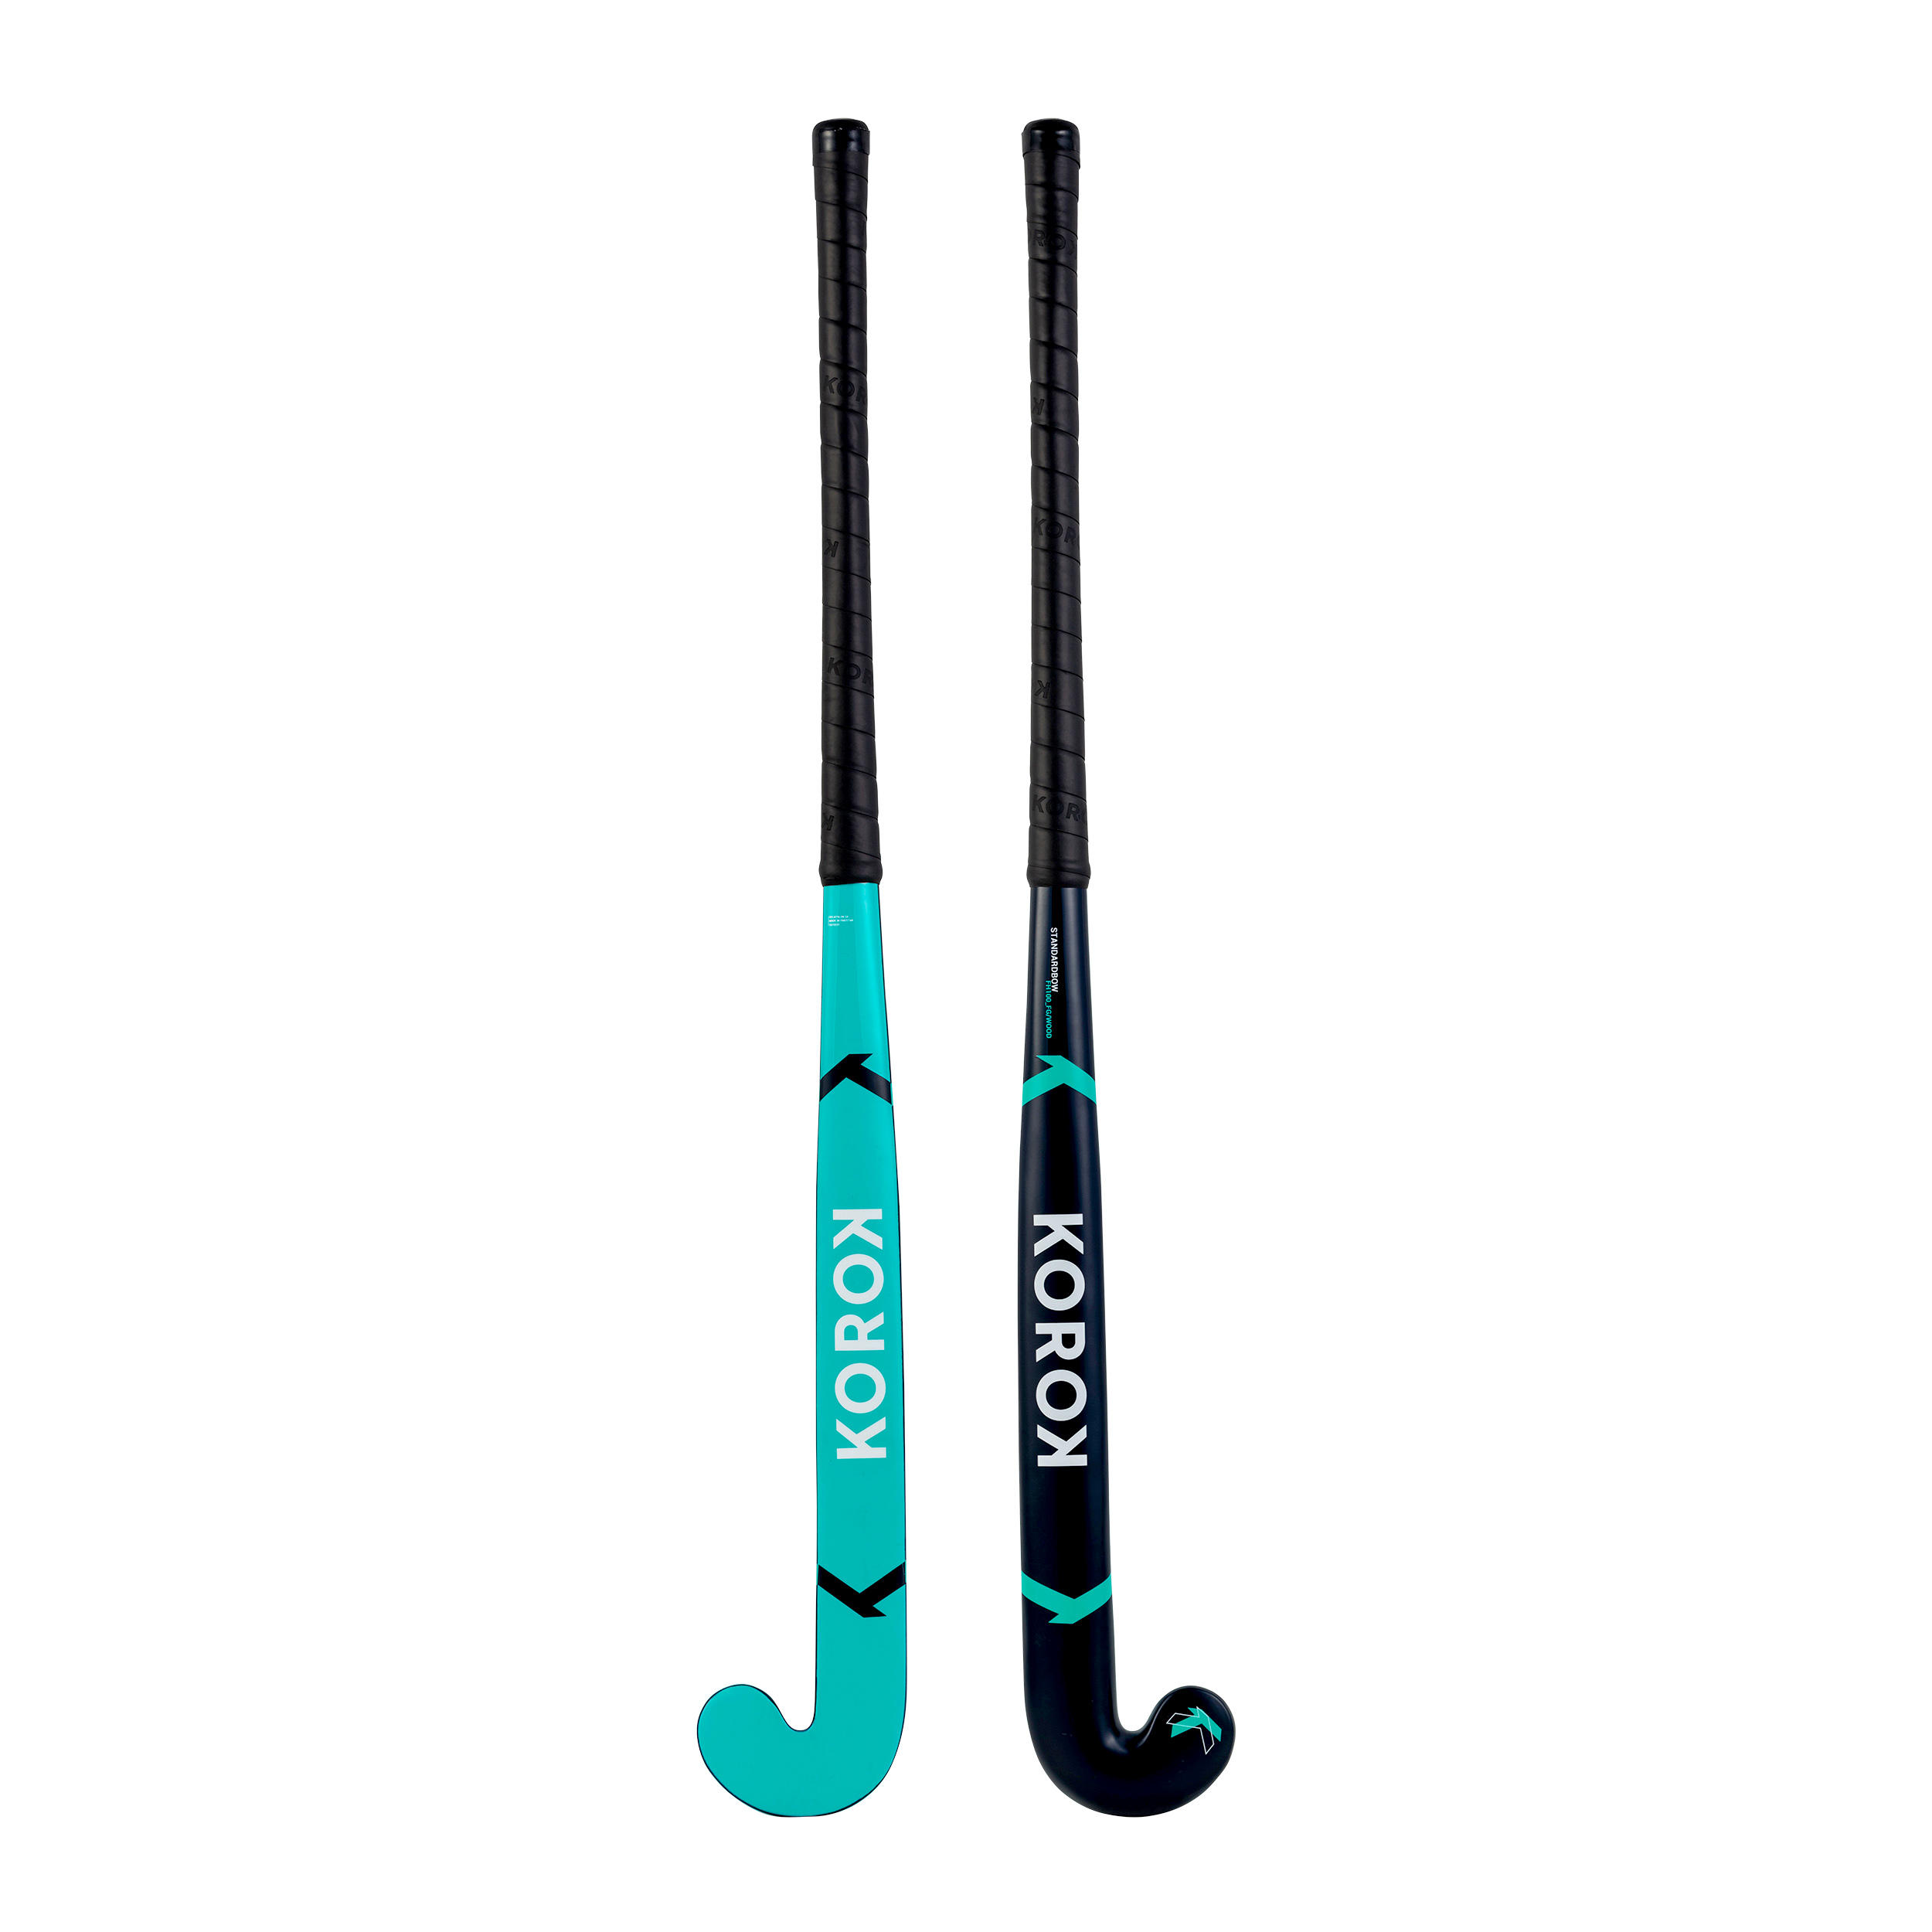 Adult Occasional Wood/Fibreglass Field Hockey Stick FH100 - Turquoise Blue 6/12